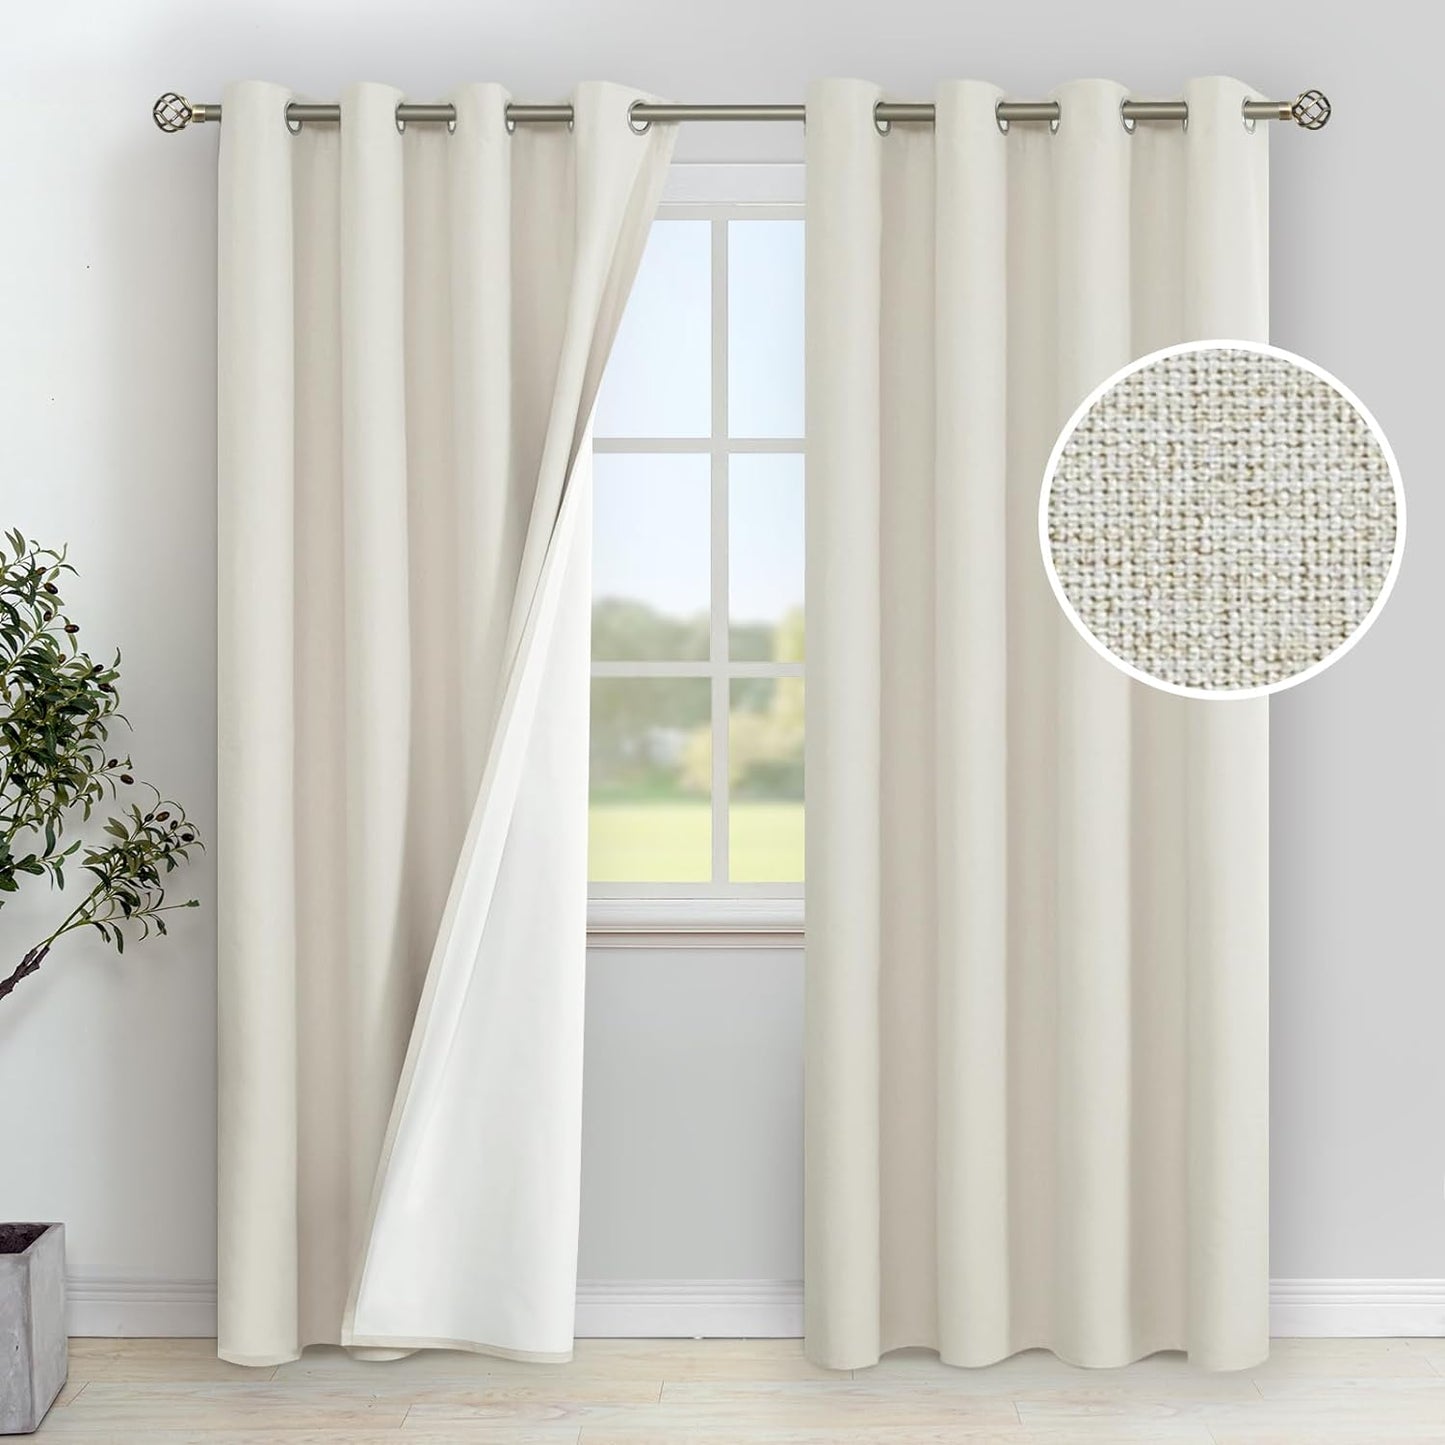 Youngstex Linen Blackout Curtains 63 Inches Long, Grommet Full Room Darkening Linen Window Drapes Thermal Insulated for Living Room Bedroom, 2 Panels, 52 X 63 Inch, Linen  YoungsTex Linen 52W X 84L 